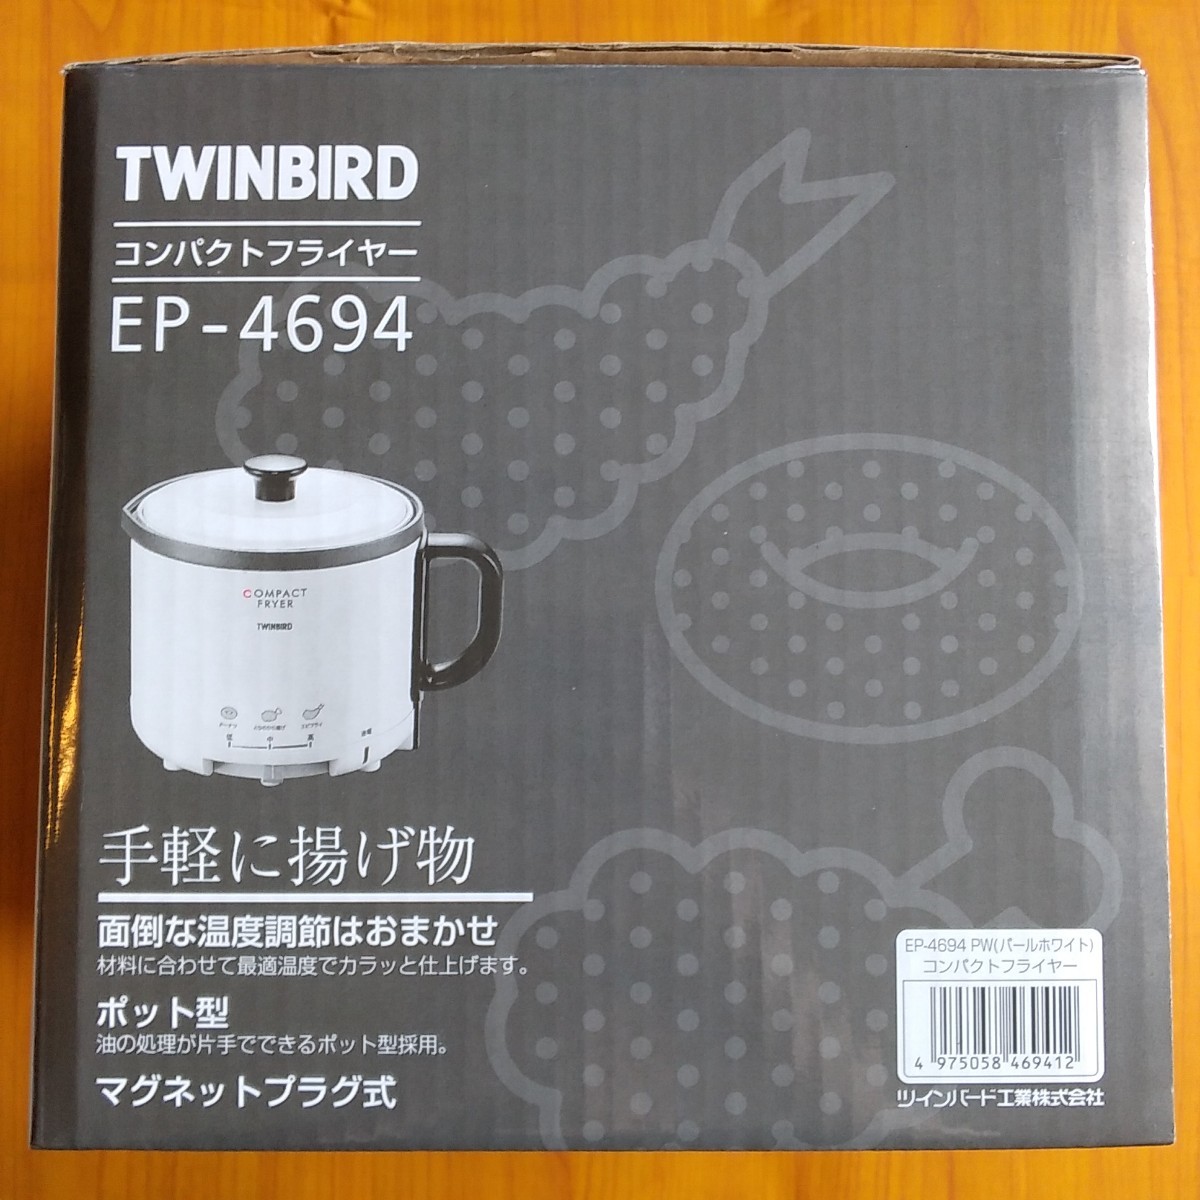 TWINBIRD コンパクトフライヤー